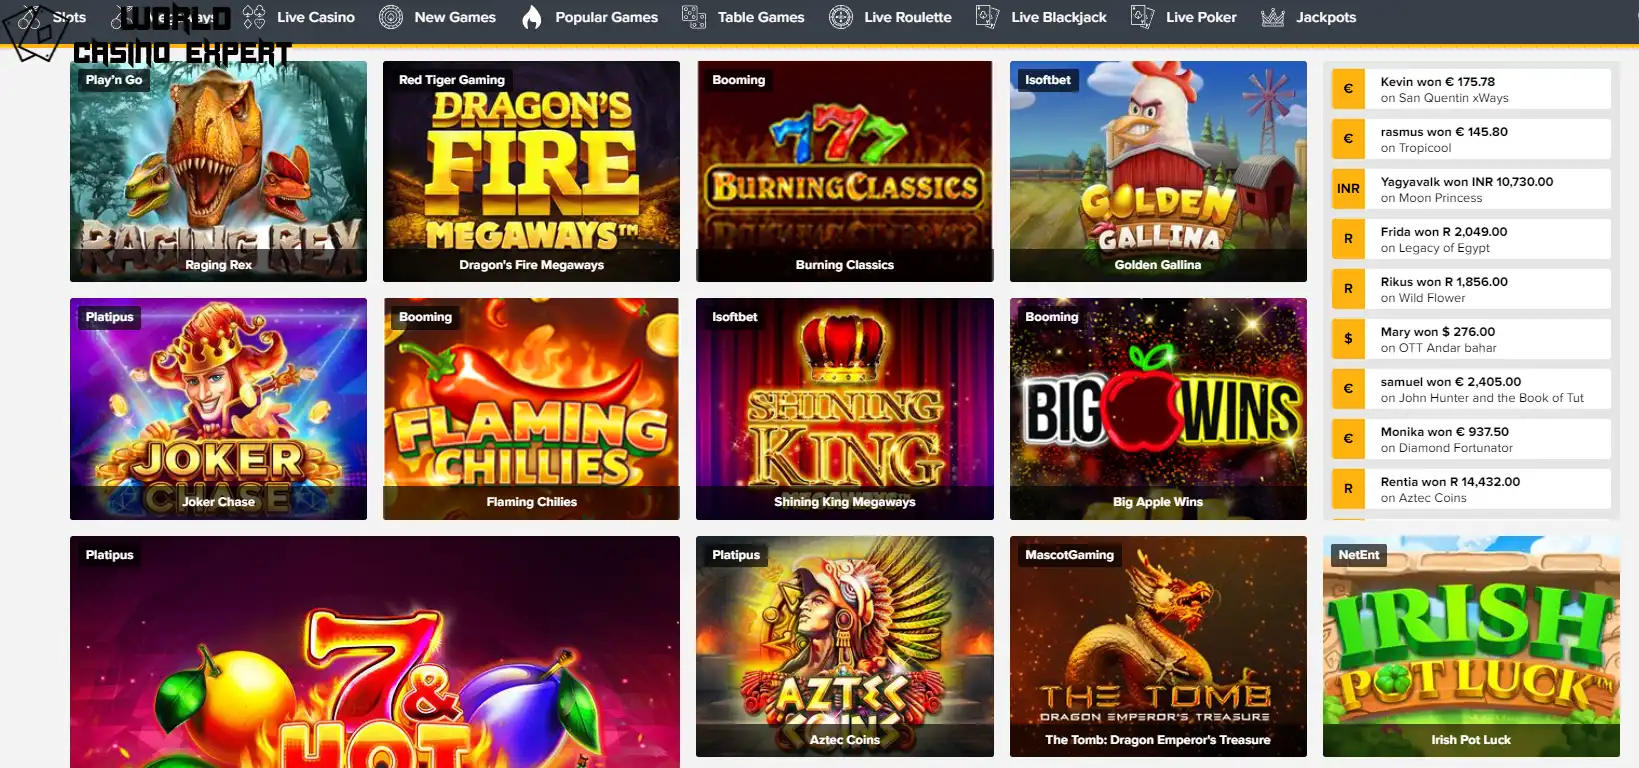 Games and Providers in The Online Casino Tusk